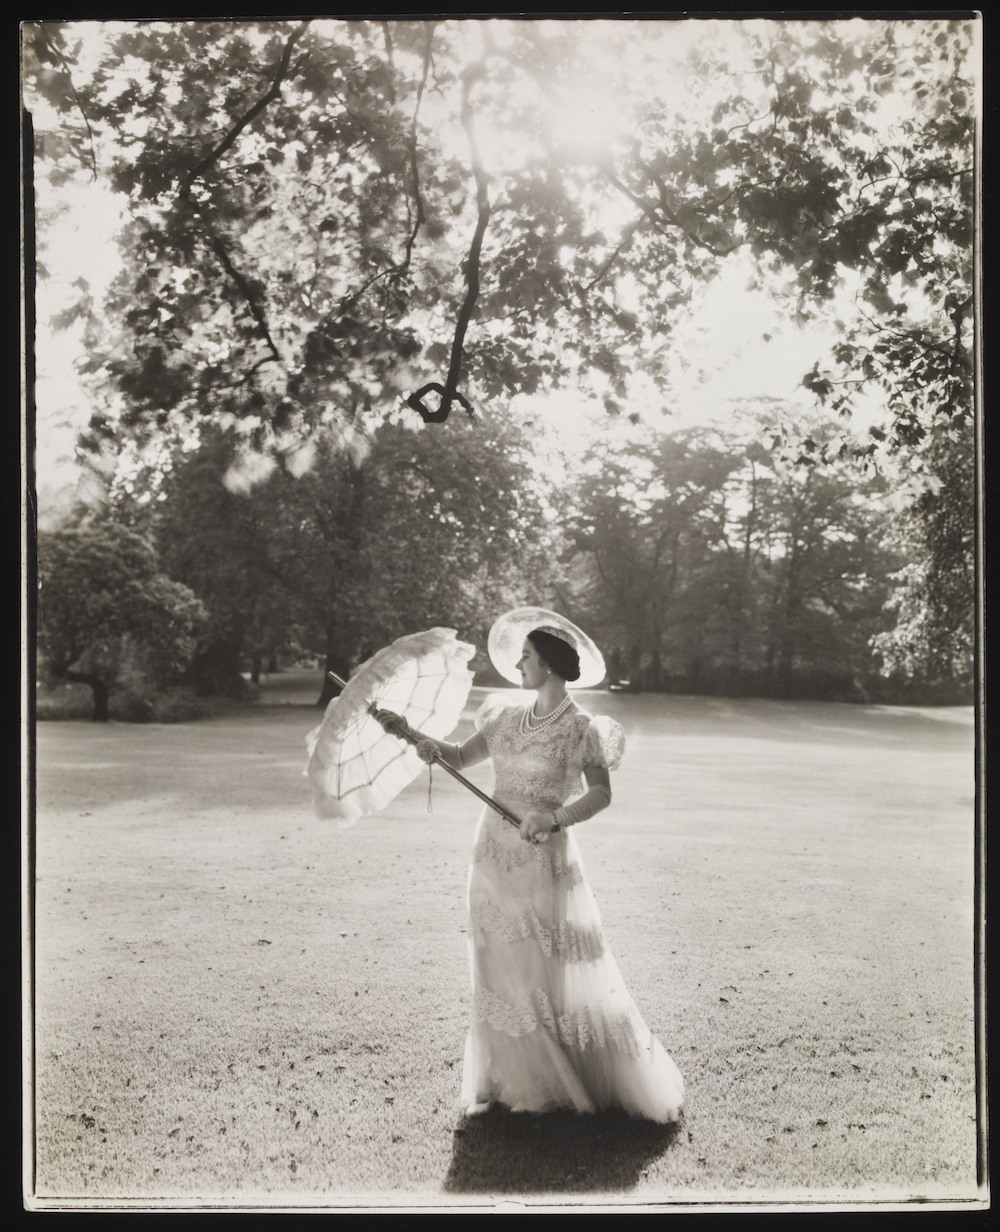 Queen Elizabeth, the Queen Mother, in Buckingham Palace gardens, 1939. Image: © Cecil Beaton/Victoria and Albert Museum, London